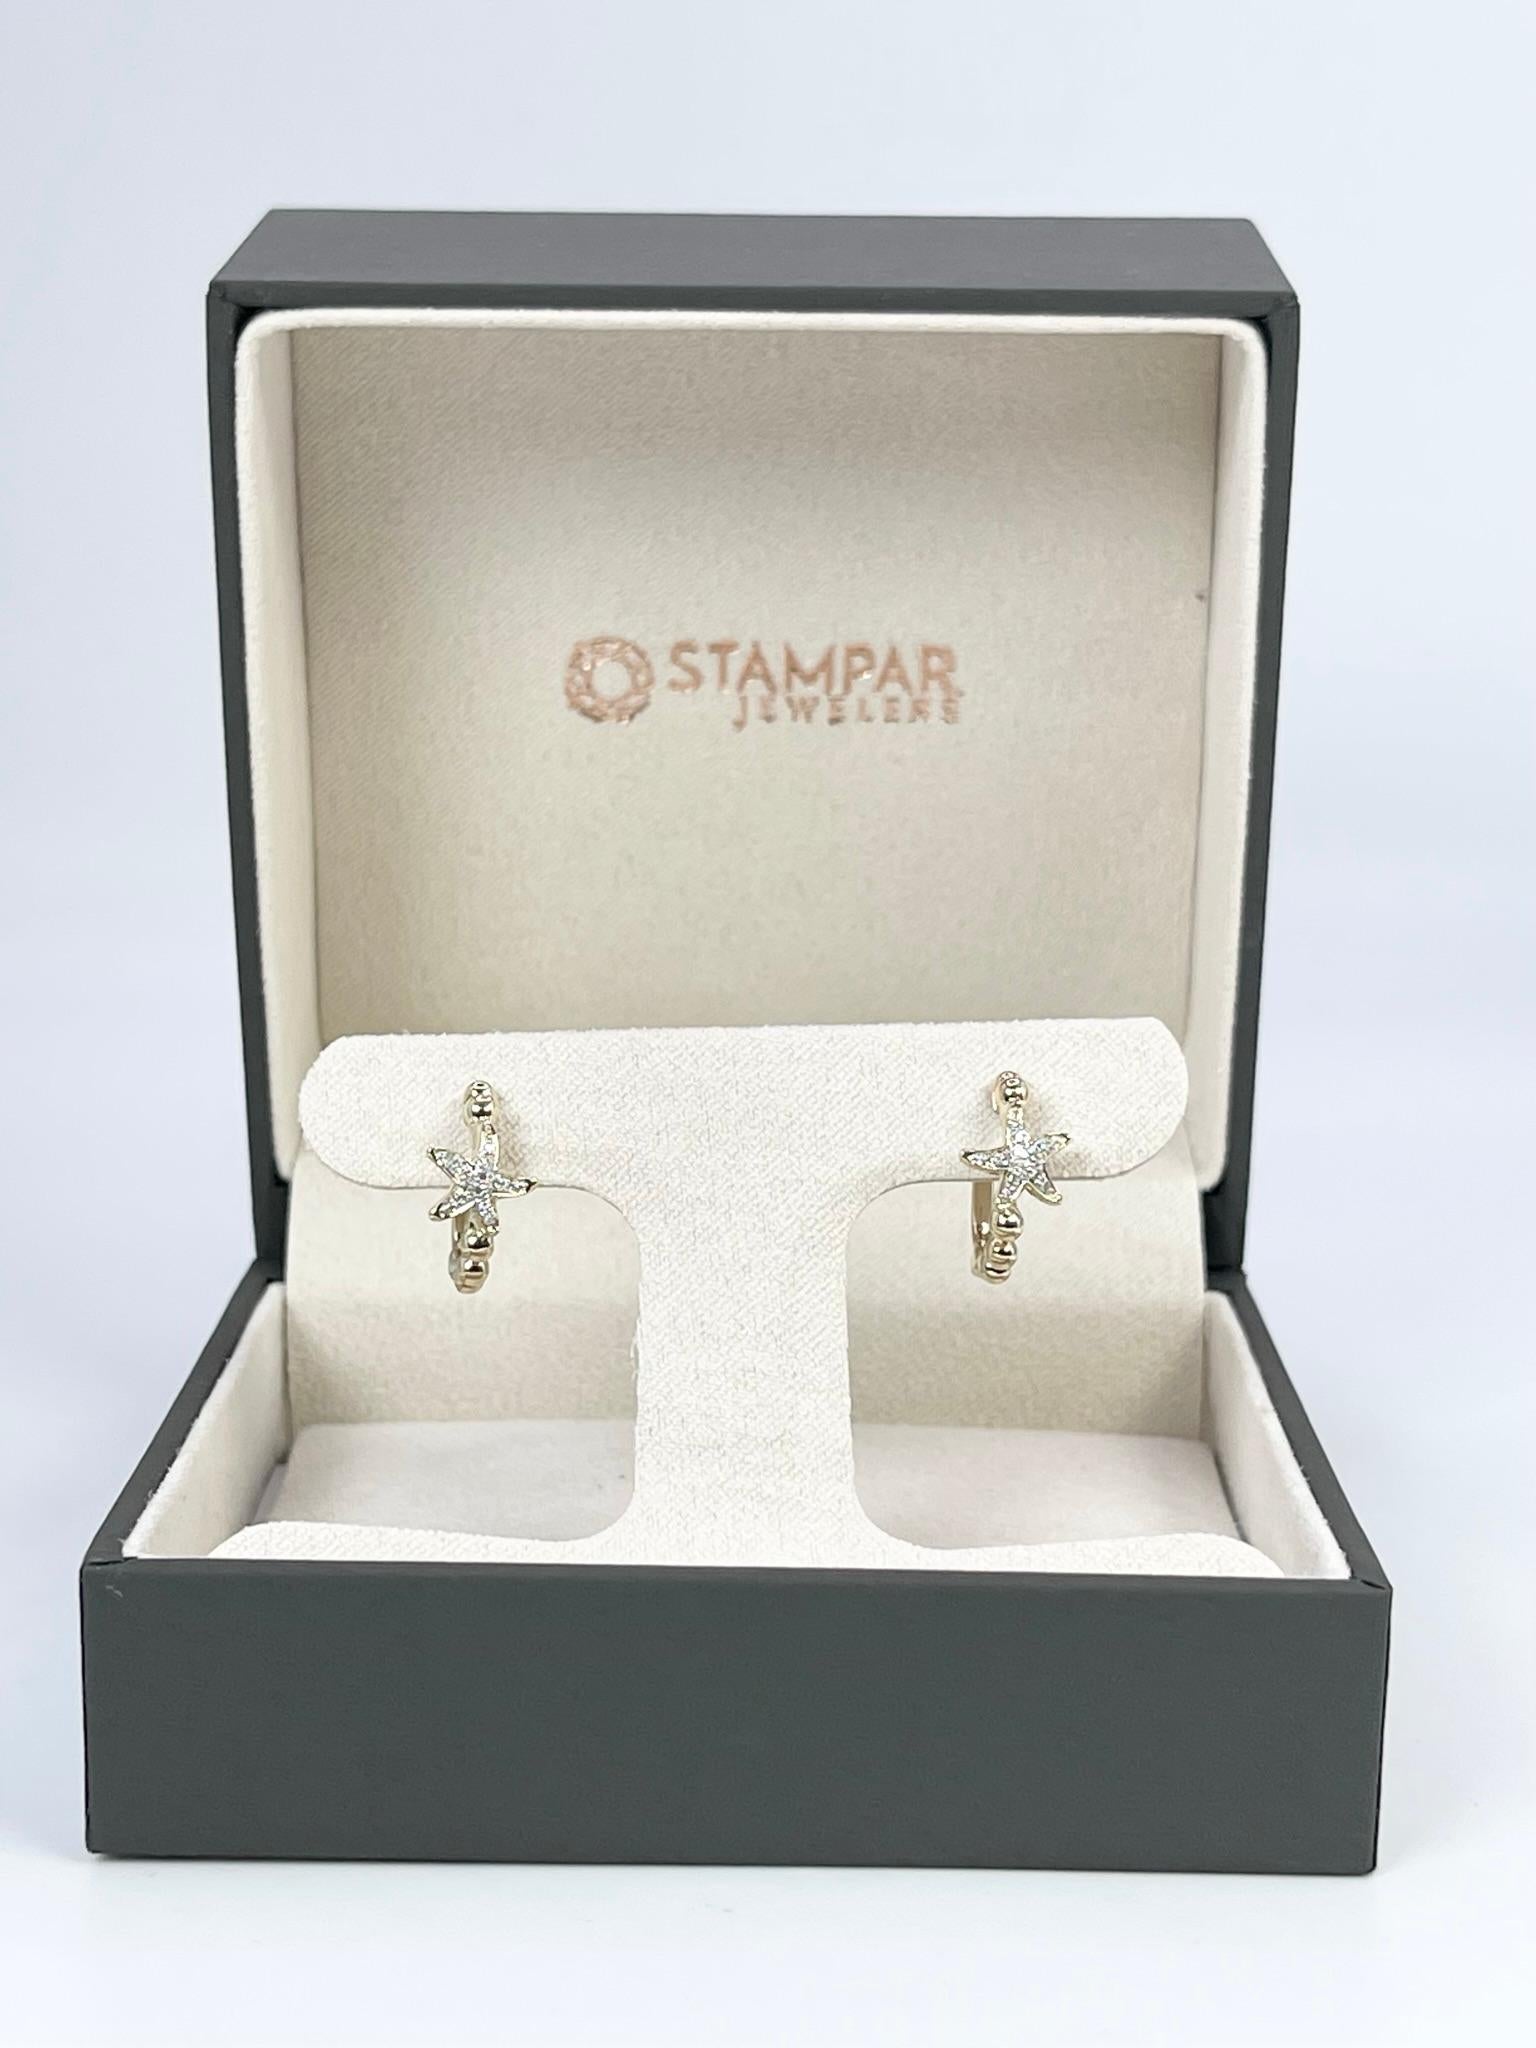 Cute Starfish earring hoops in 14KT yellow gold.

CENTER STONE: NATURAL DIAMONDS
CARAT: 0.08CT
CLARITY: VS-SI
COLOR: F-G
CUT: ROUND BRILLIANT
STAMP: 14KT
GRAM WEIGHT: 2.90gr
GOLD: 14KT yellow gold
CLOSURE: hinge on hoop
Diameter: 14mm


WHAT YOU GET